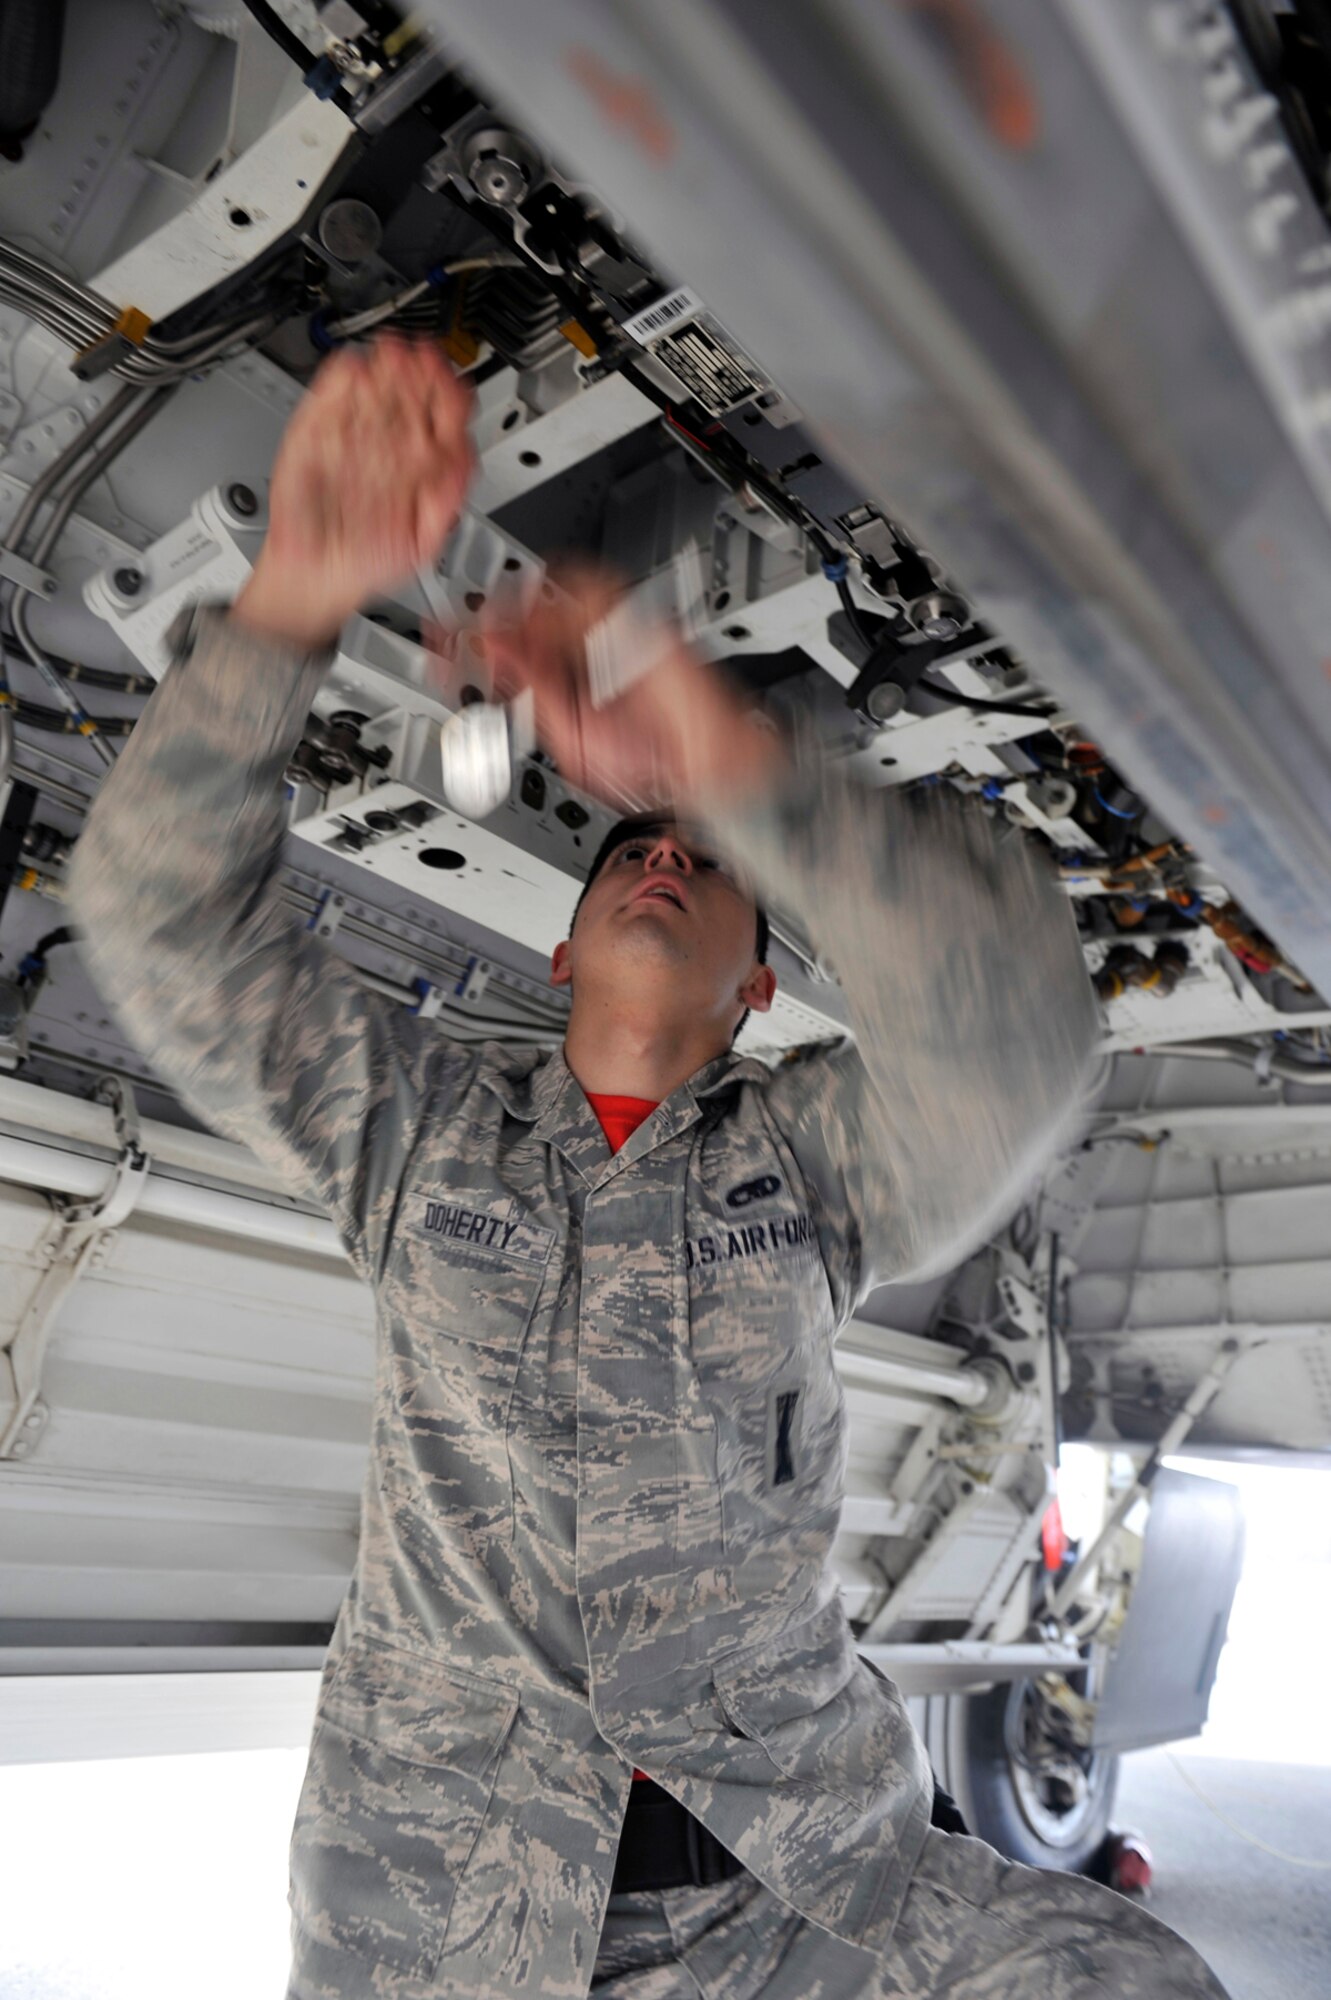 Senior Airman Stephan Doherty, 90th Fighter Squadron weapons load crew member, checks weapon compartments in the main loading bay of an F-22 Raptor during a 3rd Maintenance Group load crew competition on Joint Base Elmendorf-Richardson, Alaska, April 18, 2014. An MJ-1 Lift Truck was used to transport a Guided Bomb Unit-32 bomb into the weapon compartment during the load portion of the competition. (U.S. Air Force photo/Airman 1st Class Tammie Ramsouer)